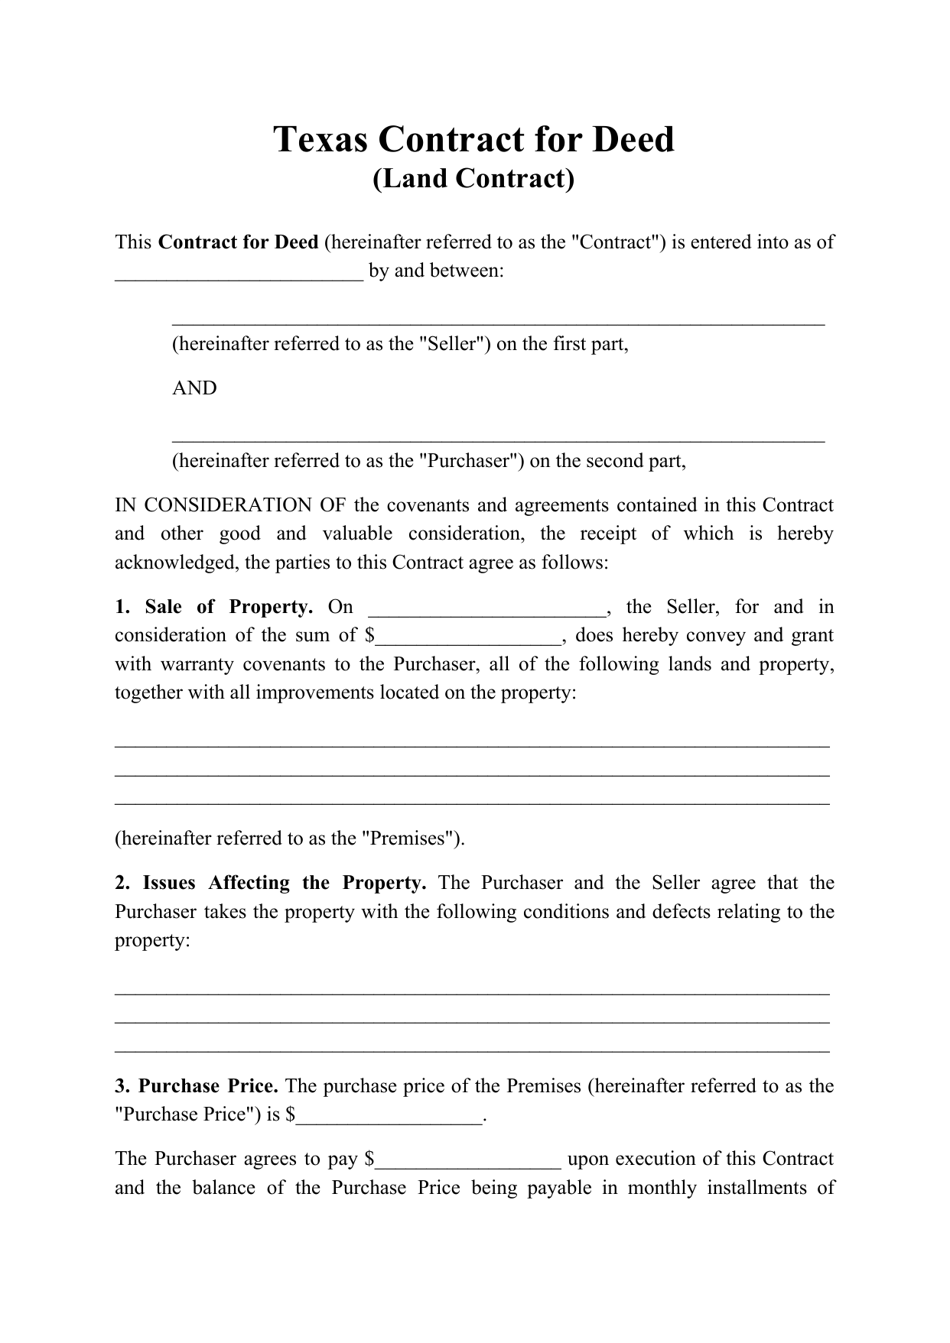 Contract for Deed (Land Contract) - Texas, Page 1